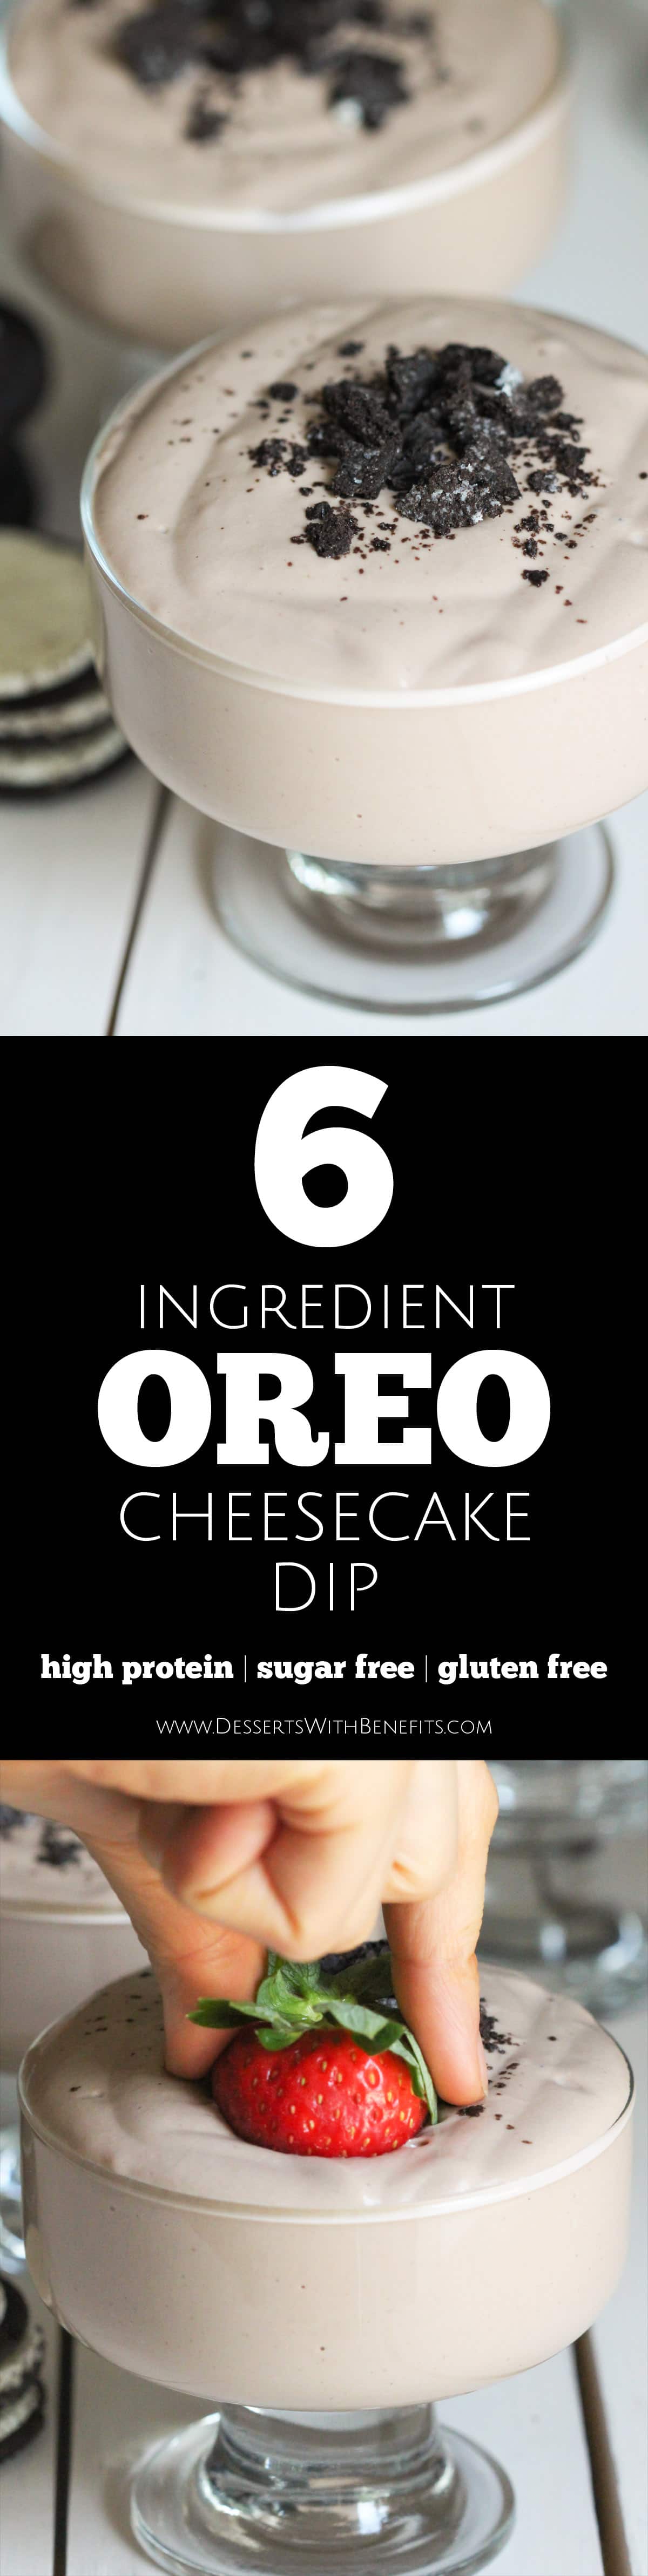 This sweet, rich, and creamy Healthy Oreo Cheesecake Dip tastes insanely sinful and delicious, when really, it’s refined sugar free, low fat, low carb, high protein, and gluten free! This is everything you could ever ever want in a dessert dip! Healthy Dessert Recipes at Desserts with Benefits